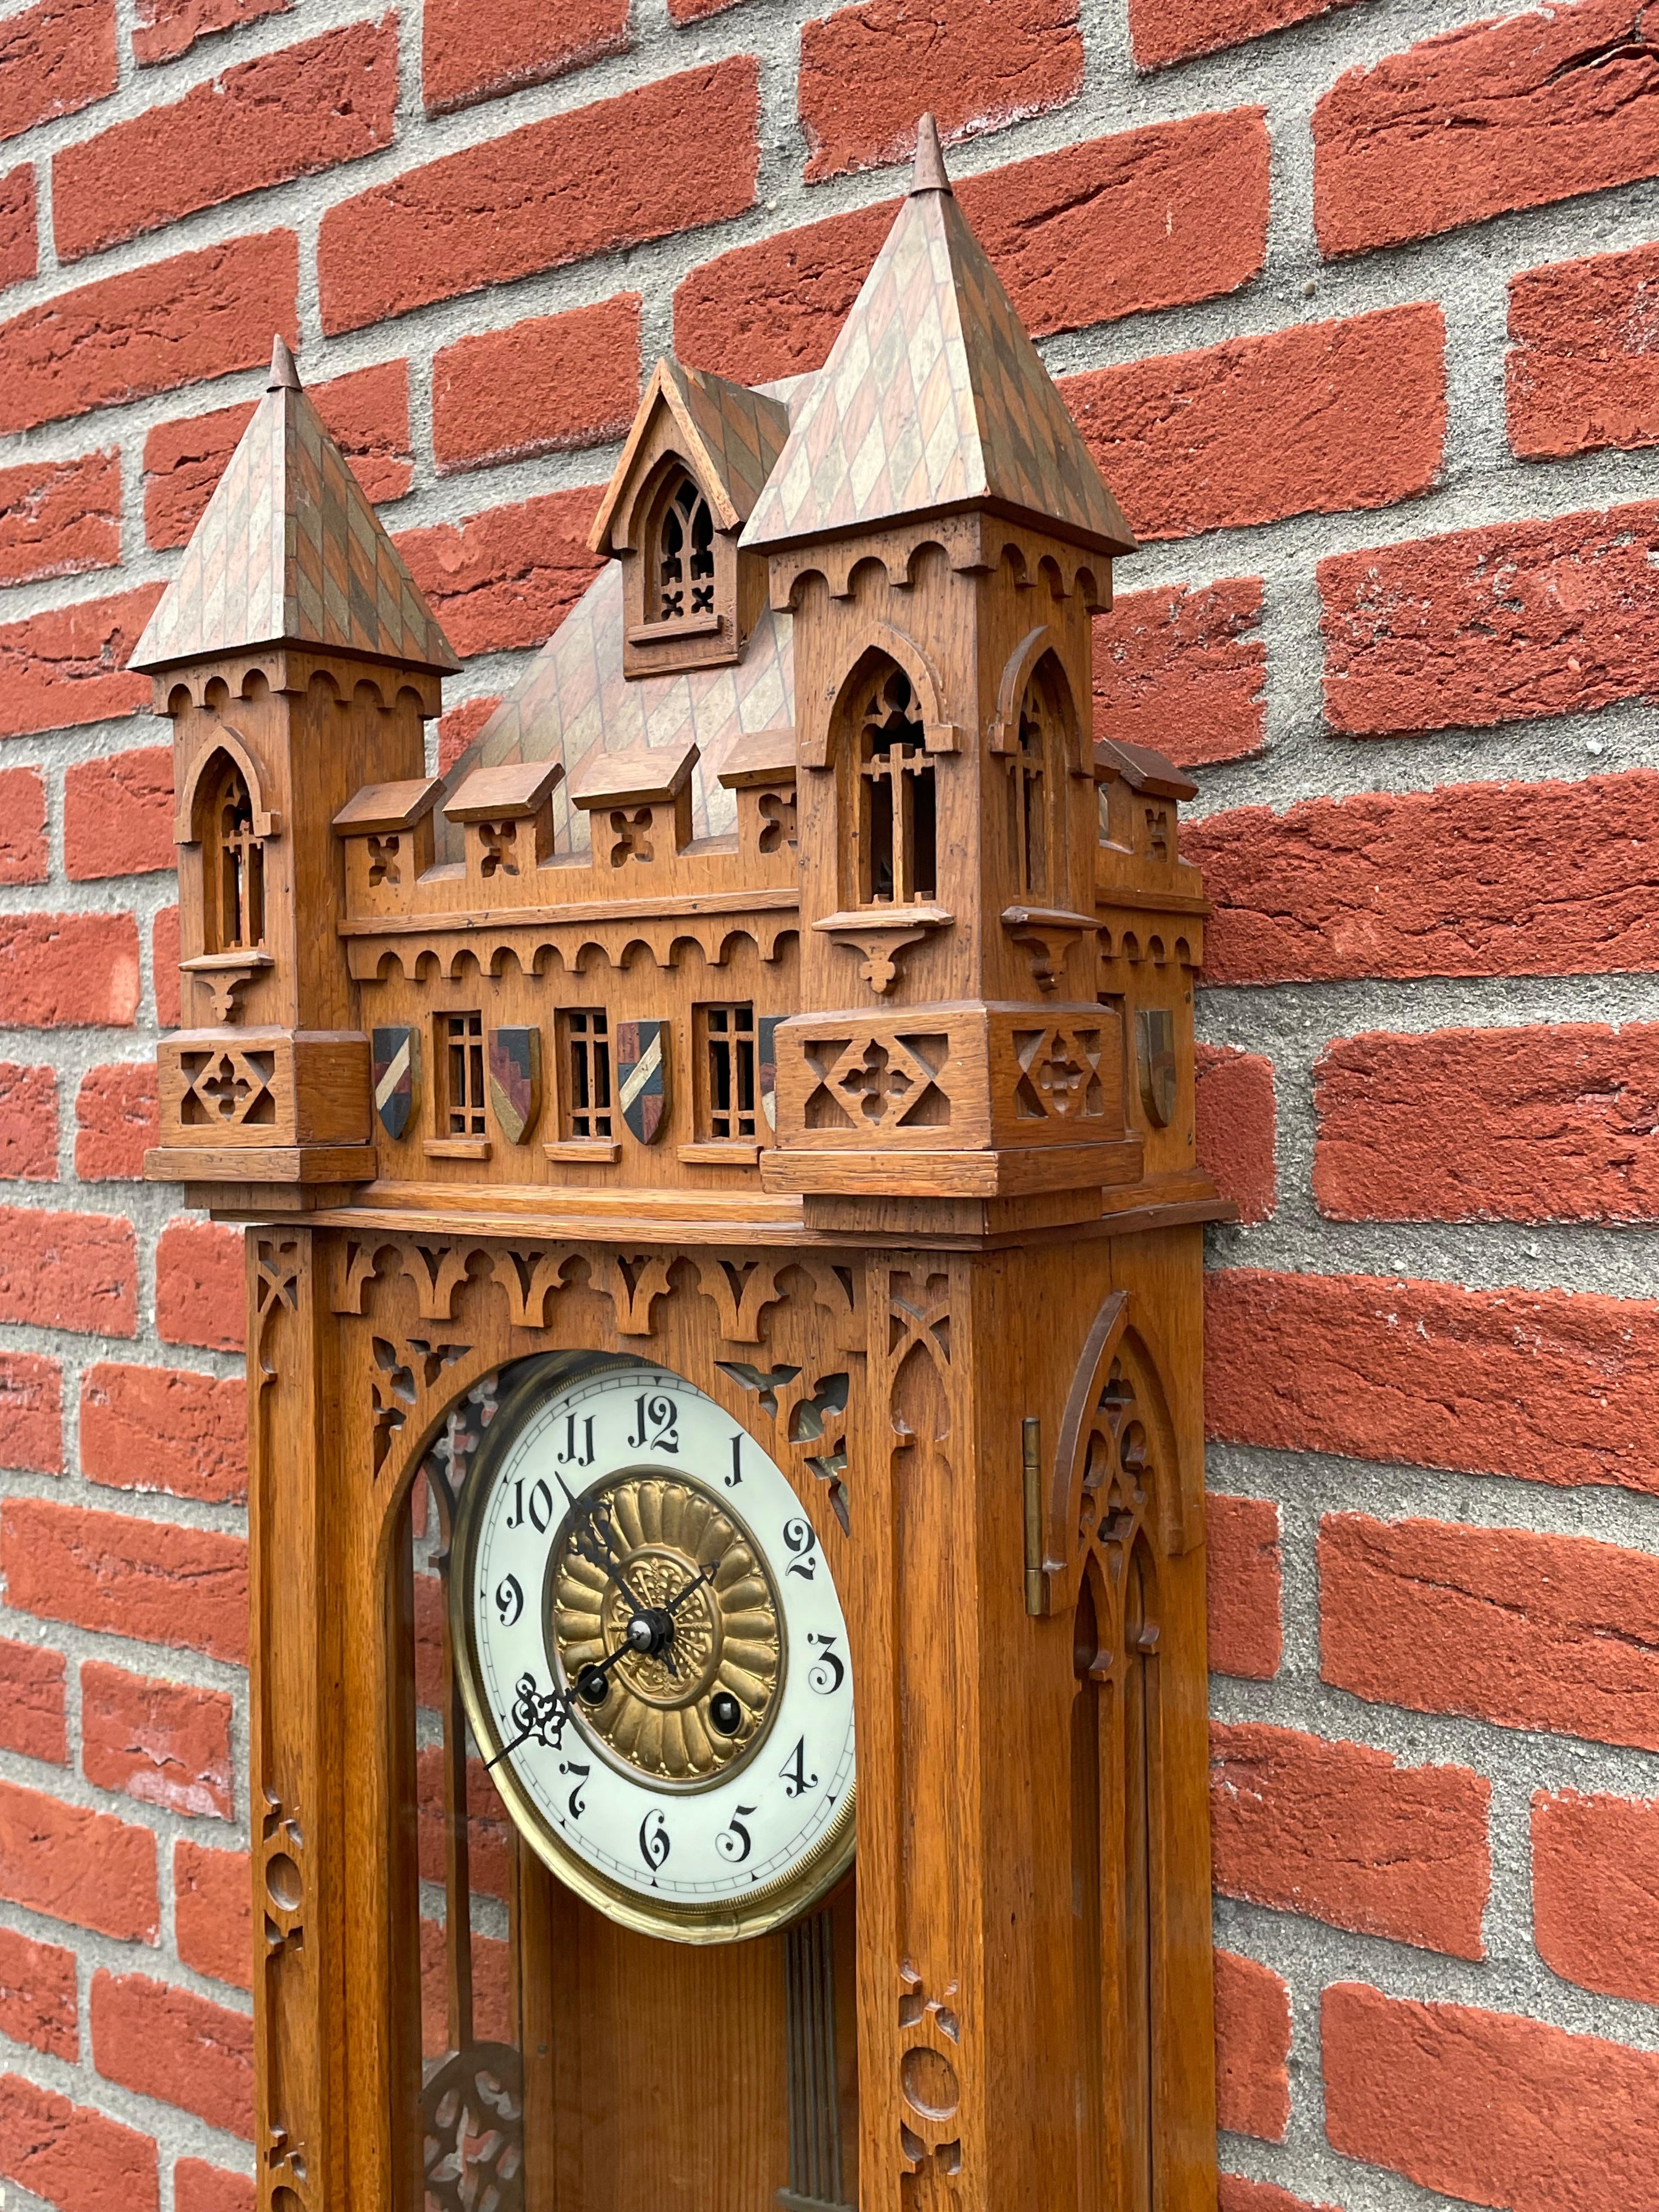 Stunning clock for the collectors of rare and truly stylish Gothic antiques.

Gothic wall clocks are a rare find and this more than three feet tall specimen is one of the tallest and the most elaborate we have seen to date. All handcrafted and hand